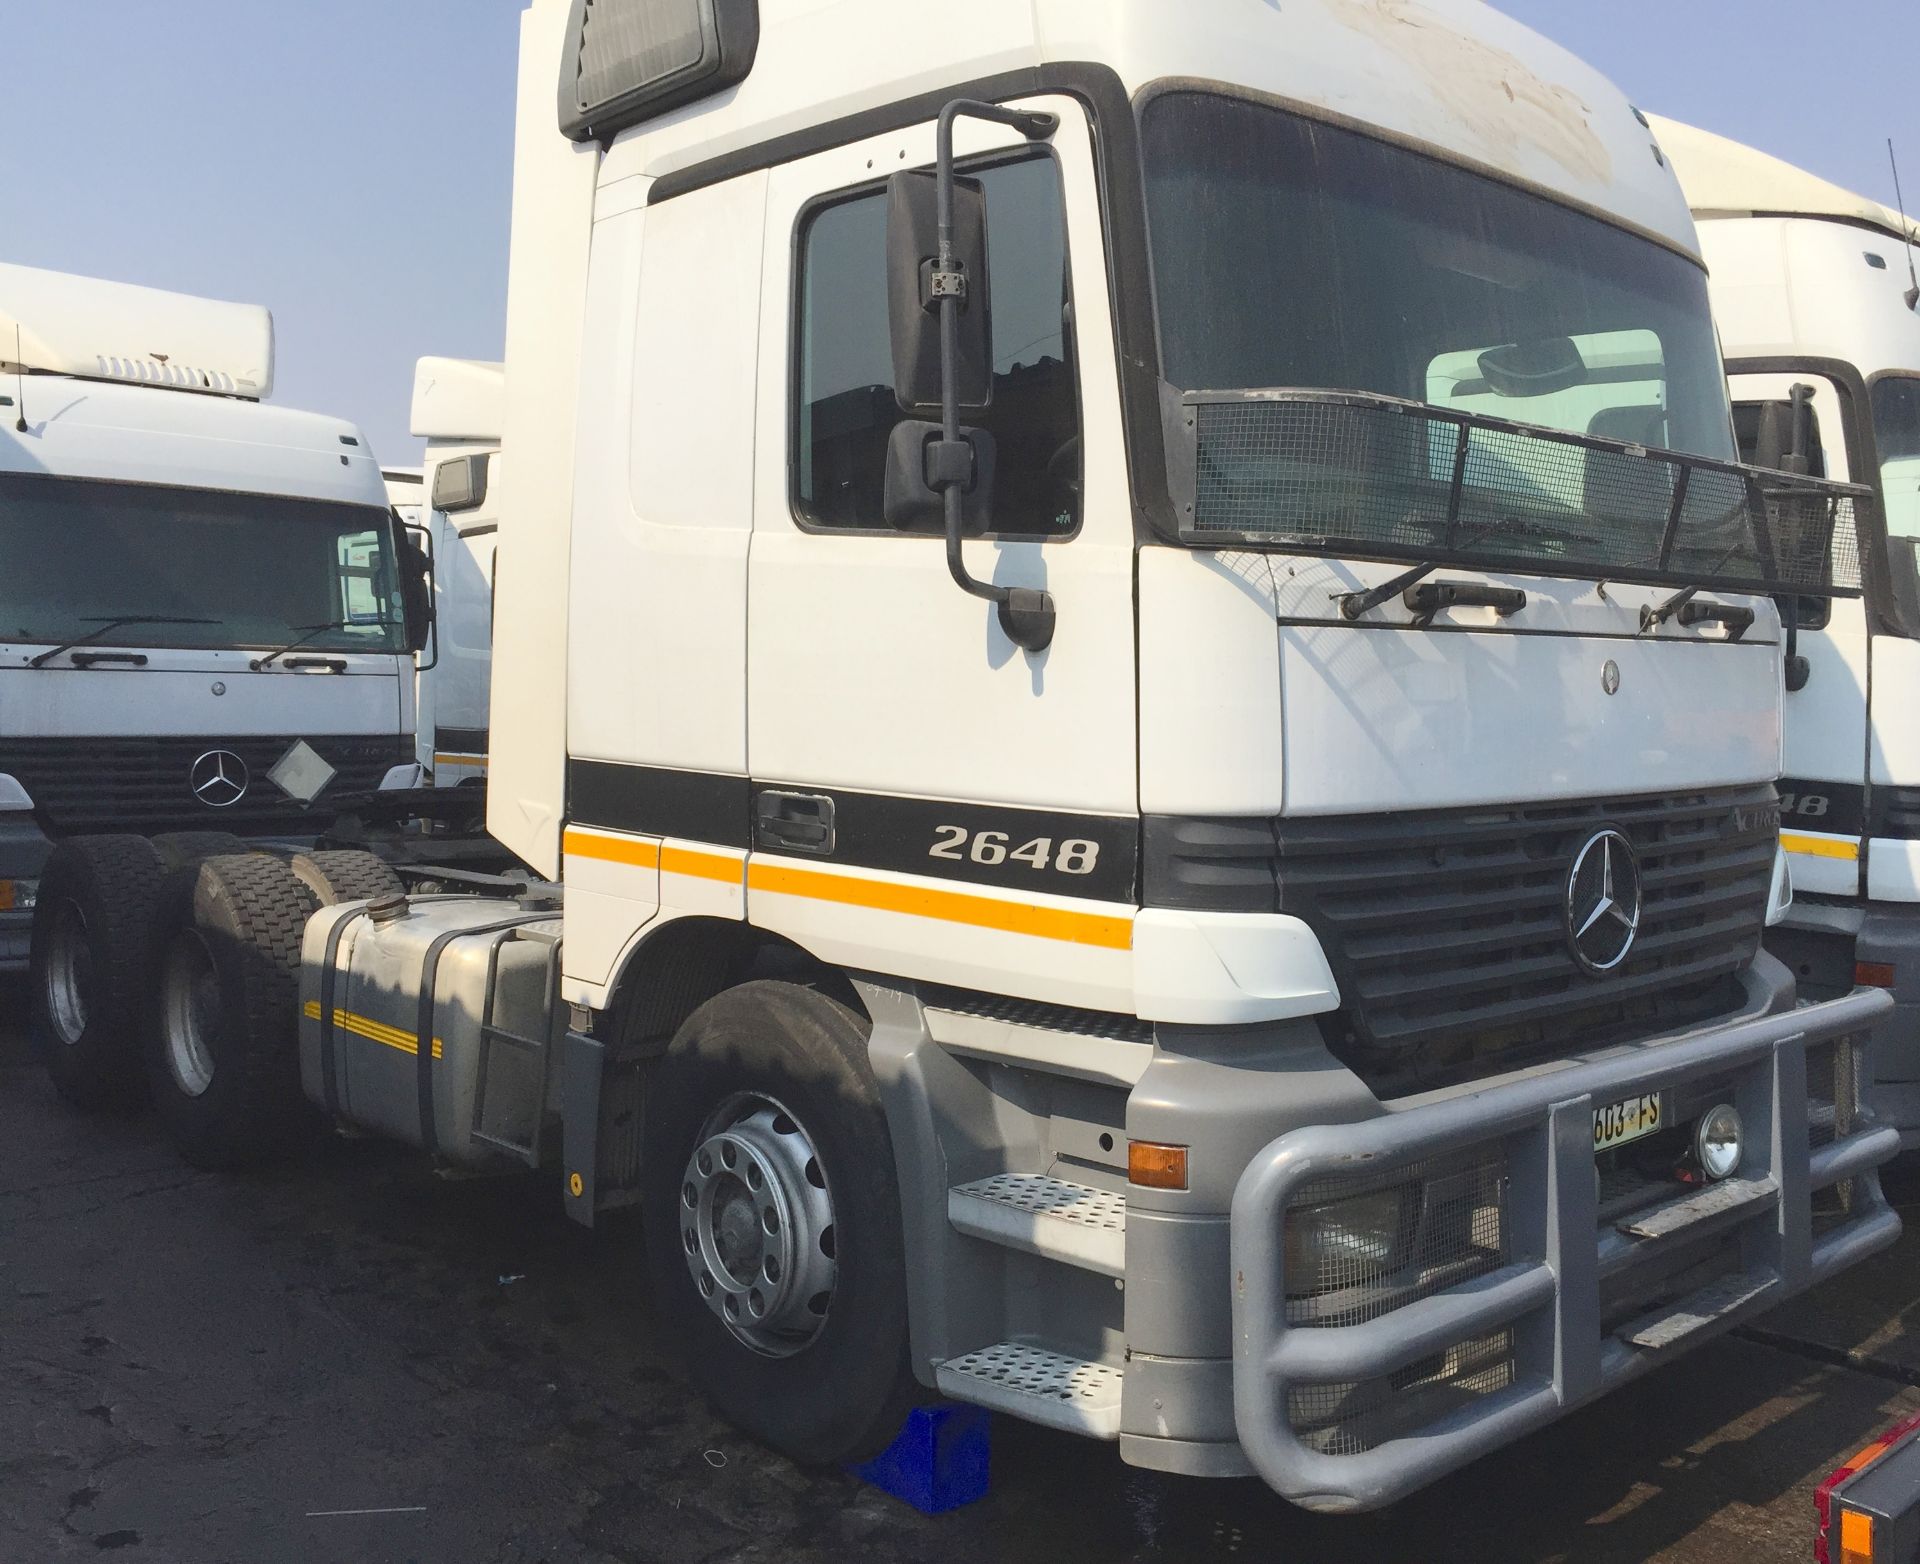 2003 M/BENZ ACTROS 2648 6X4 T/T - REG NO: FMC603FS - (ITEM TO BE SOLD SUBJECT TO CONFIRMATION) - Image 2 of 9